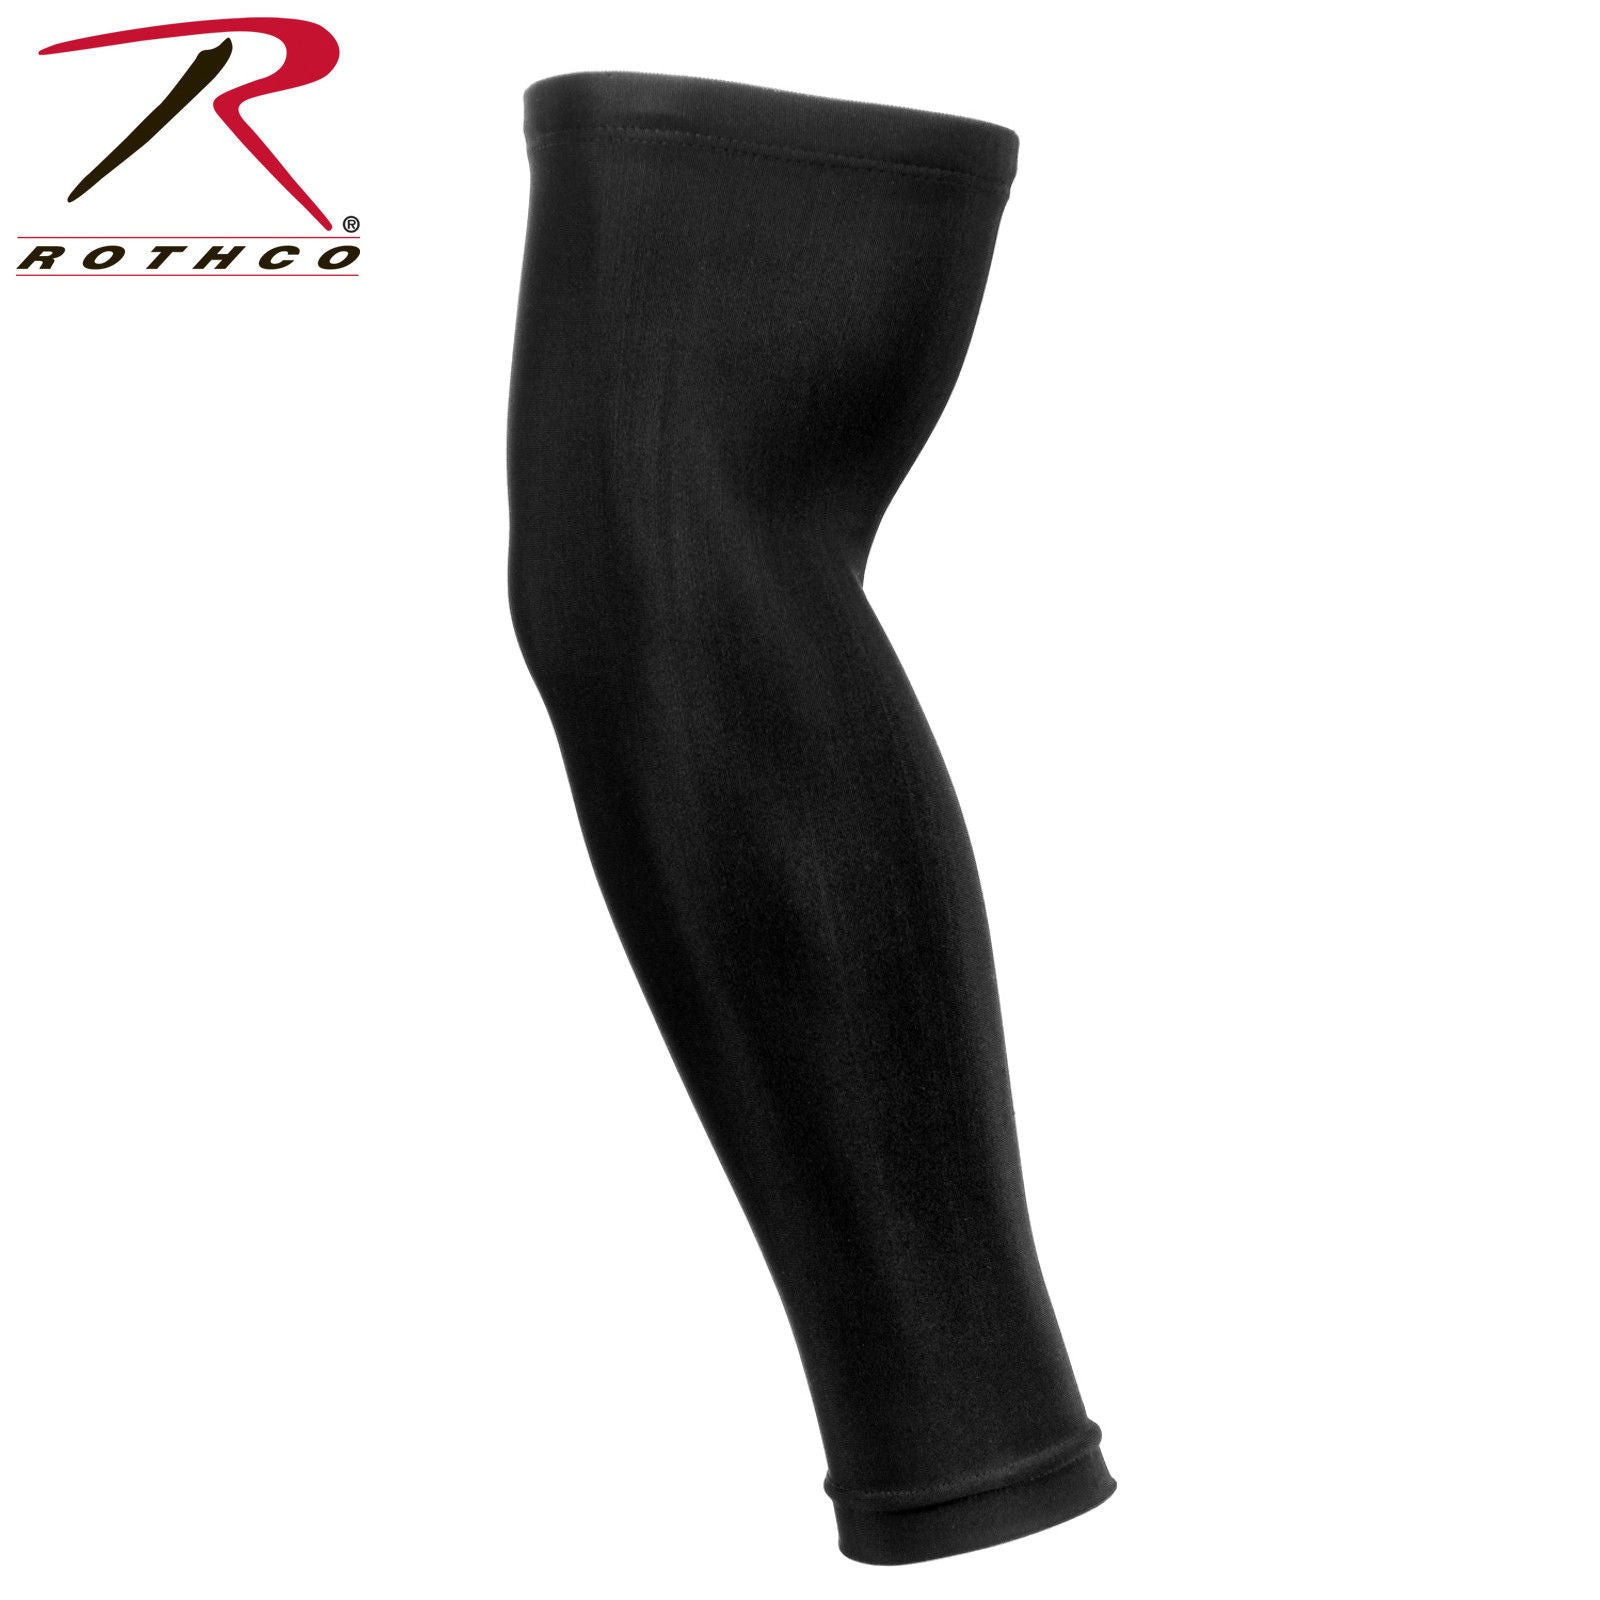 Rothco Black Tactical Cover Up Arm Sleeves - Poly Spandex Arm